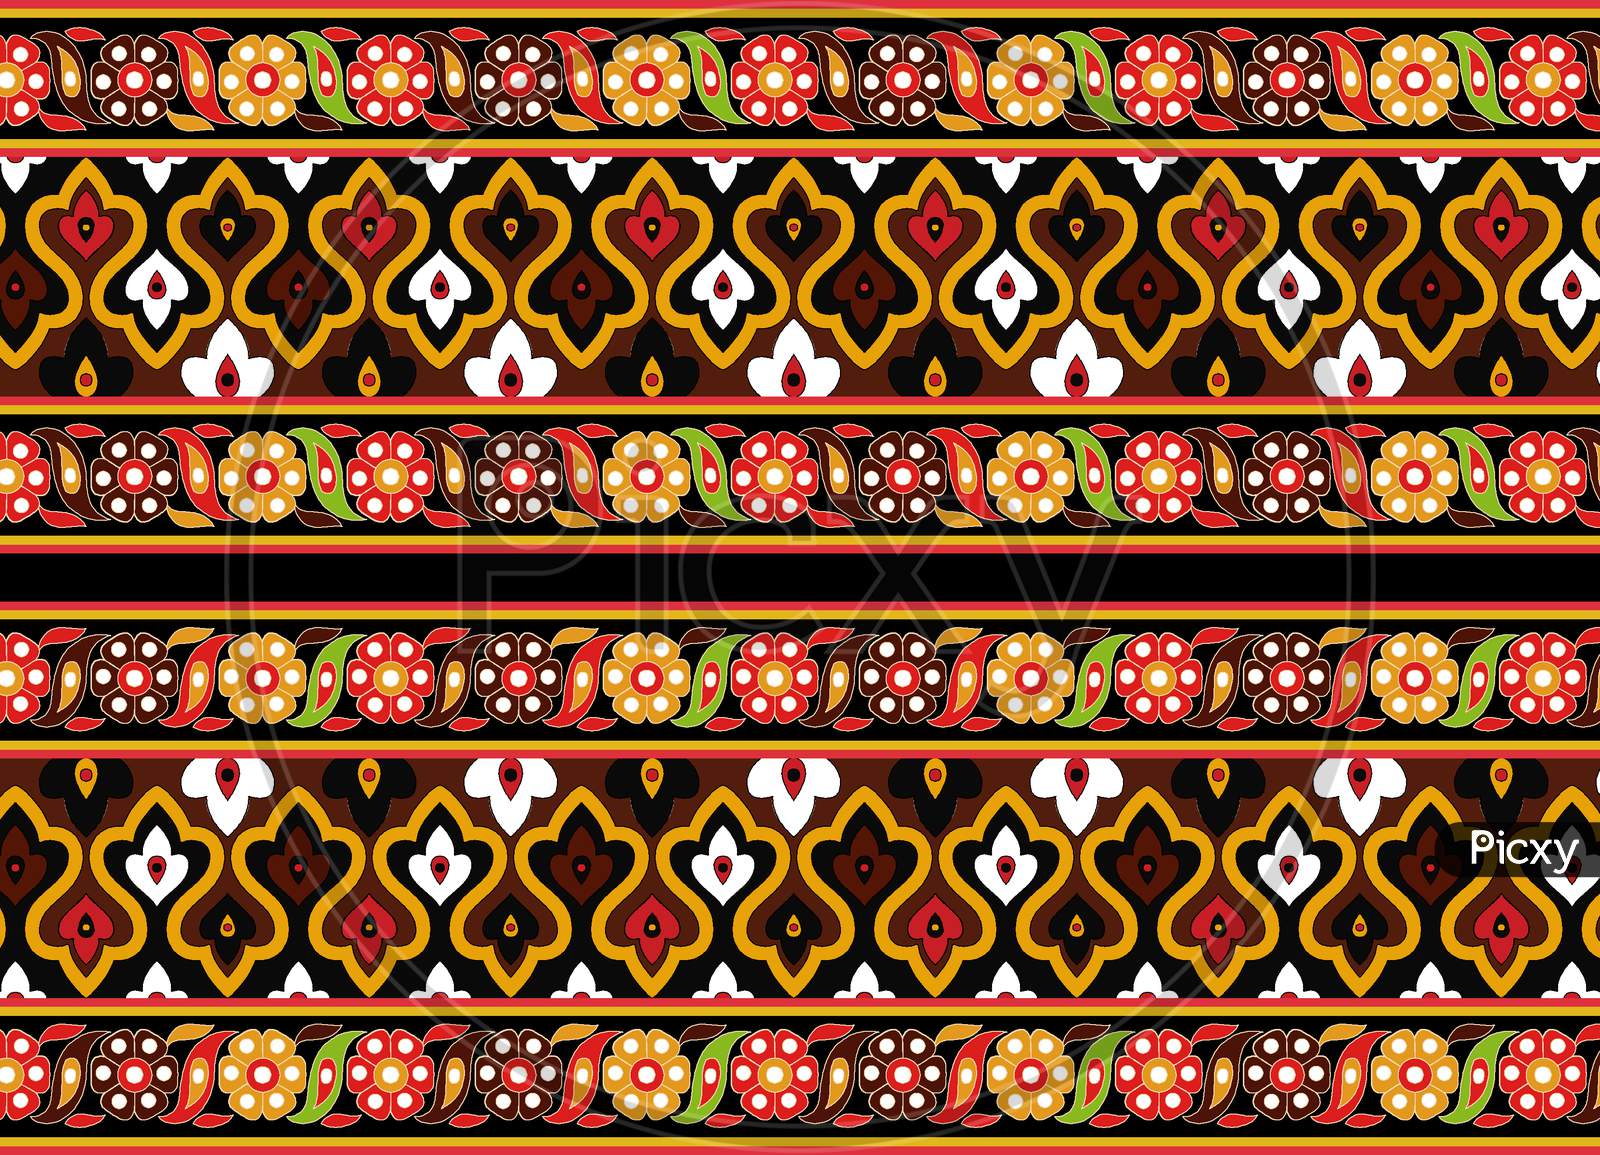 A SEAMESS Traditional Border ART With Black Background